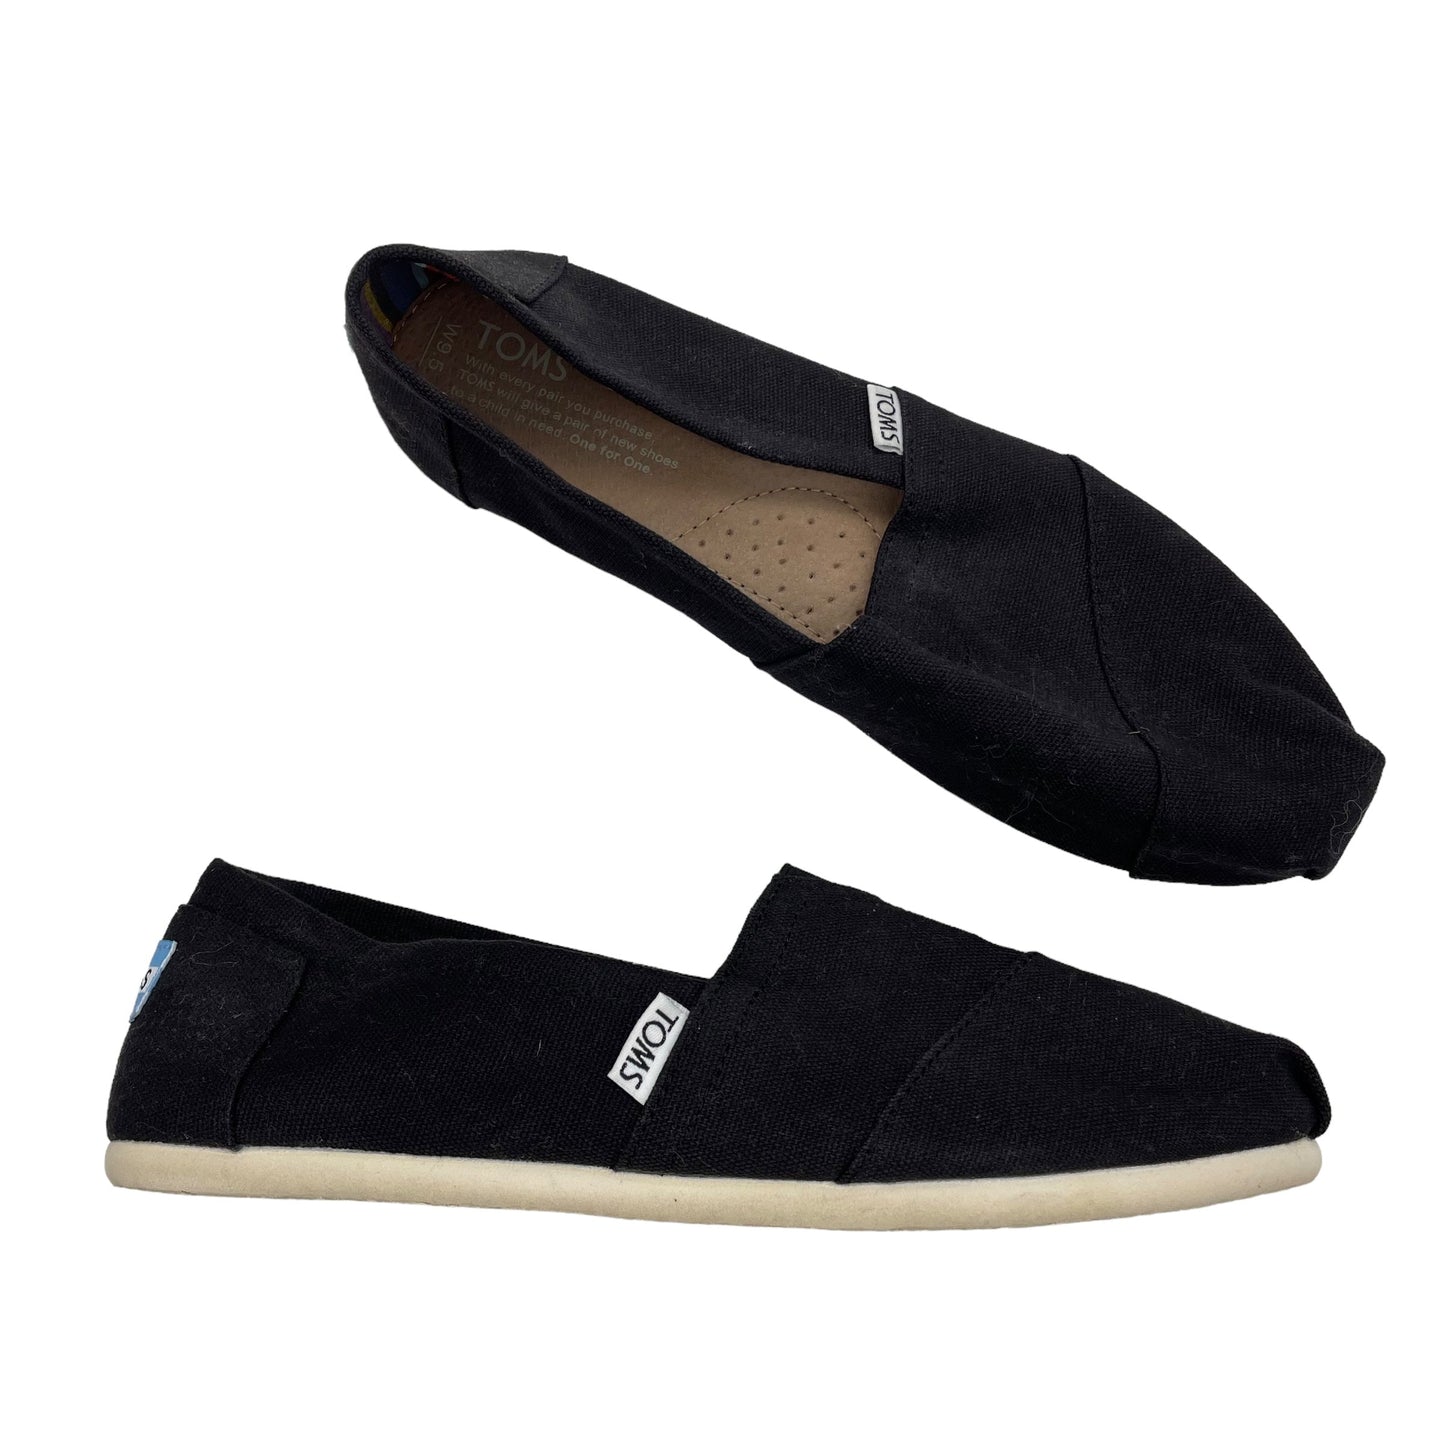 Shoes Flats By Toms  Size: 9.5